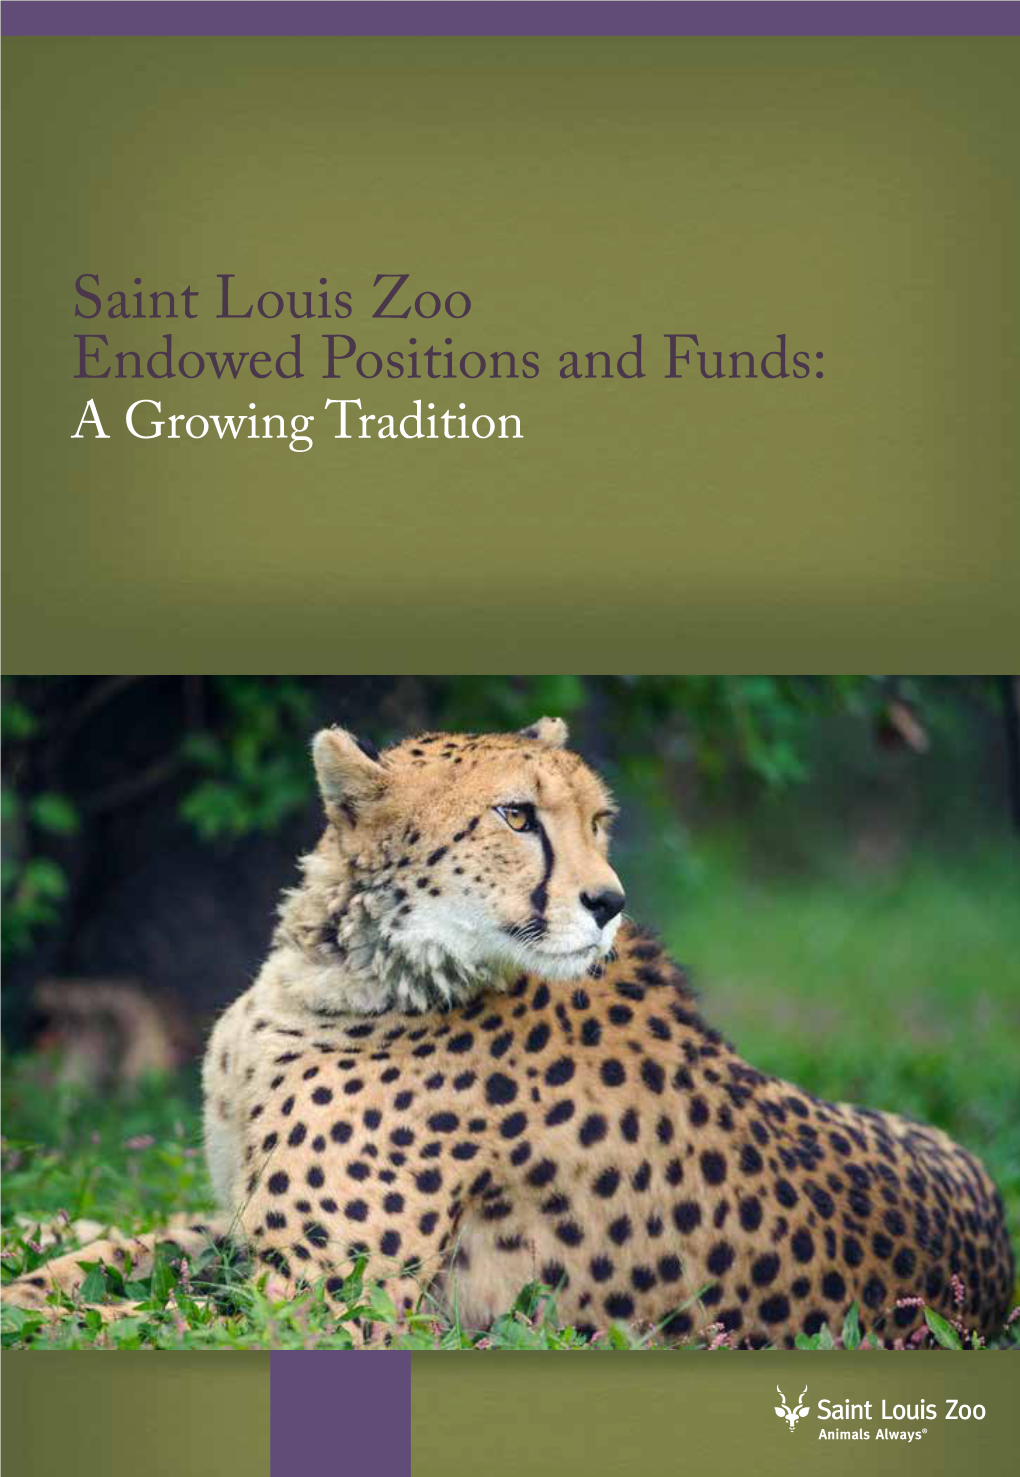 Saint Louis Zoo Endowed Positions and Funds: a Growing Tradition